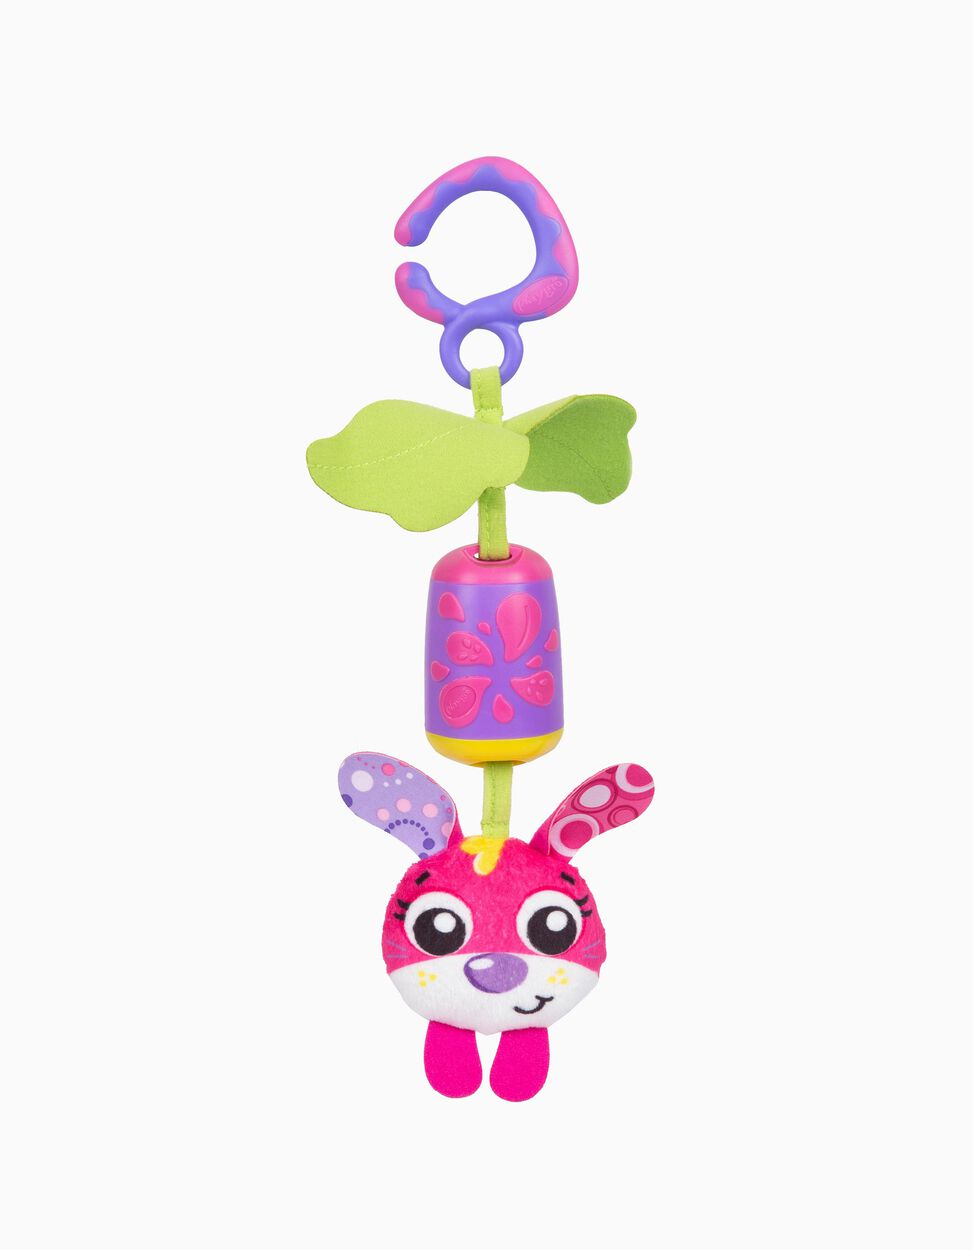 Juguete Chime Sonny Bunny Playgro